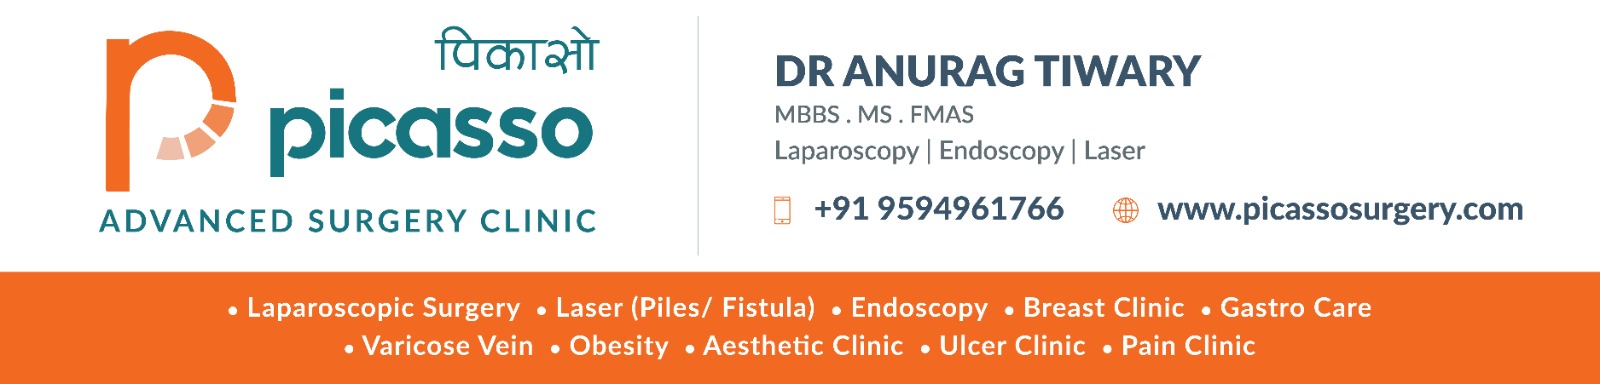 Medical Services in Mumbai- Picasso Surgery